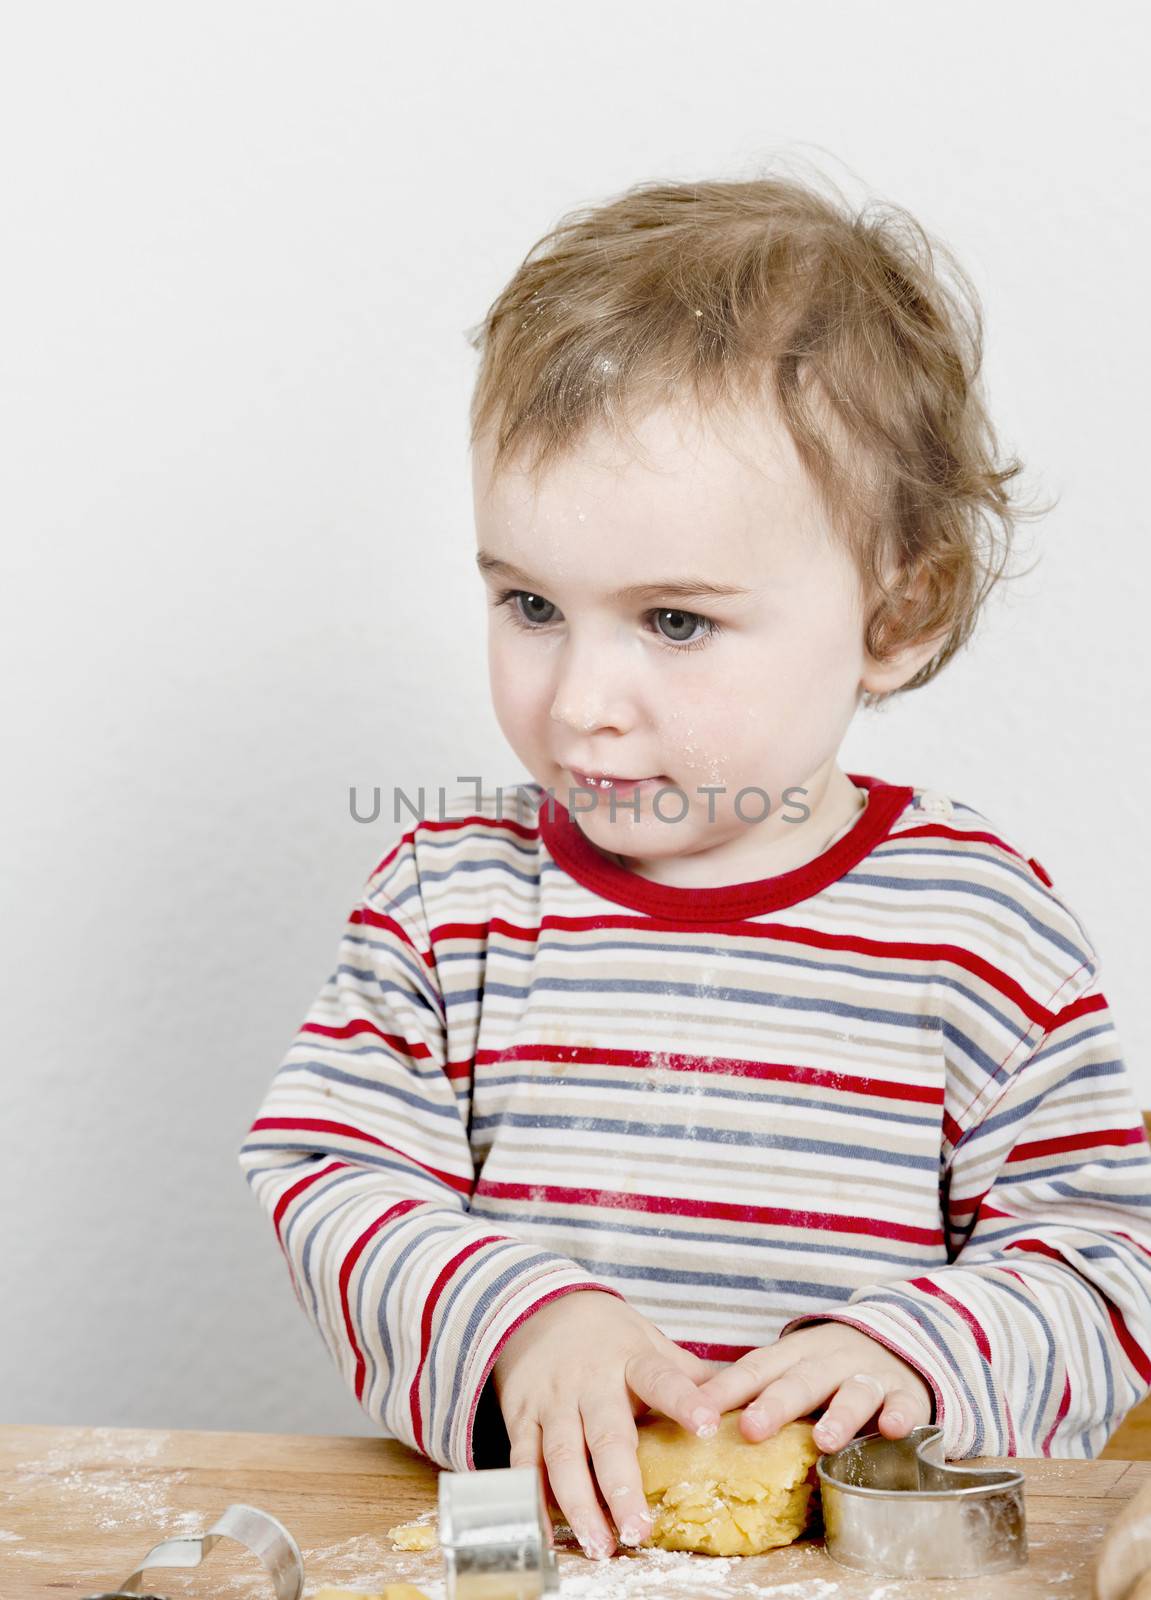 vertical image of 2 year old child making biscuit  at wooden desk